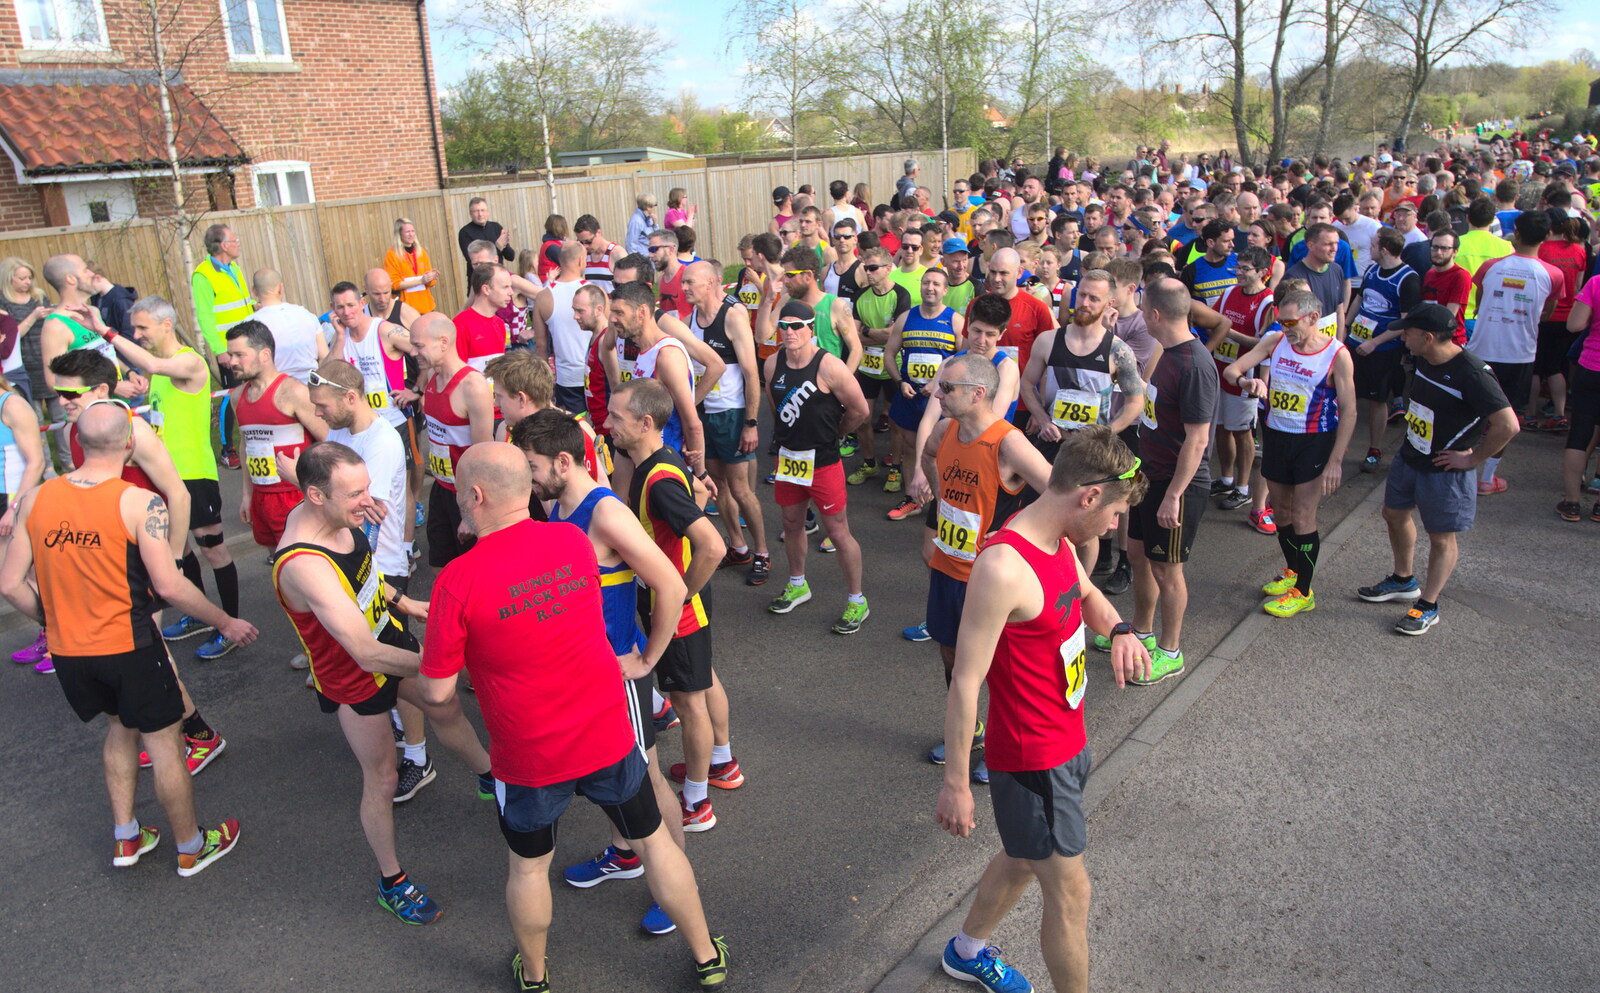 Half-marathon runners at the start line from The Black Dog Festival of Running, Bungay, Suffolk - 2nd April 2017